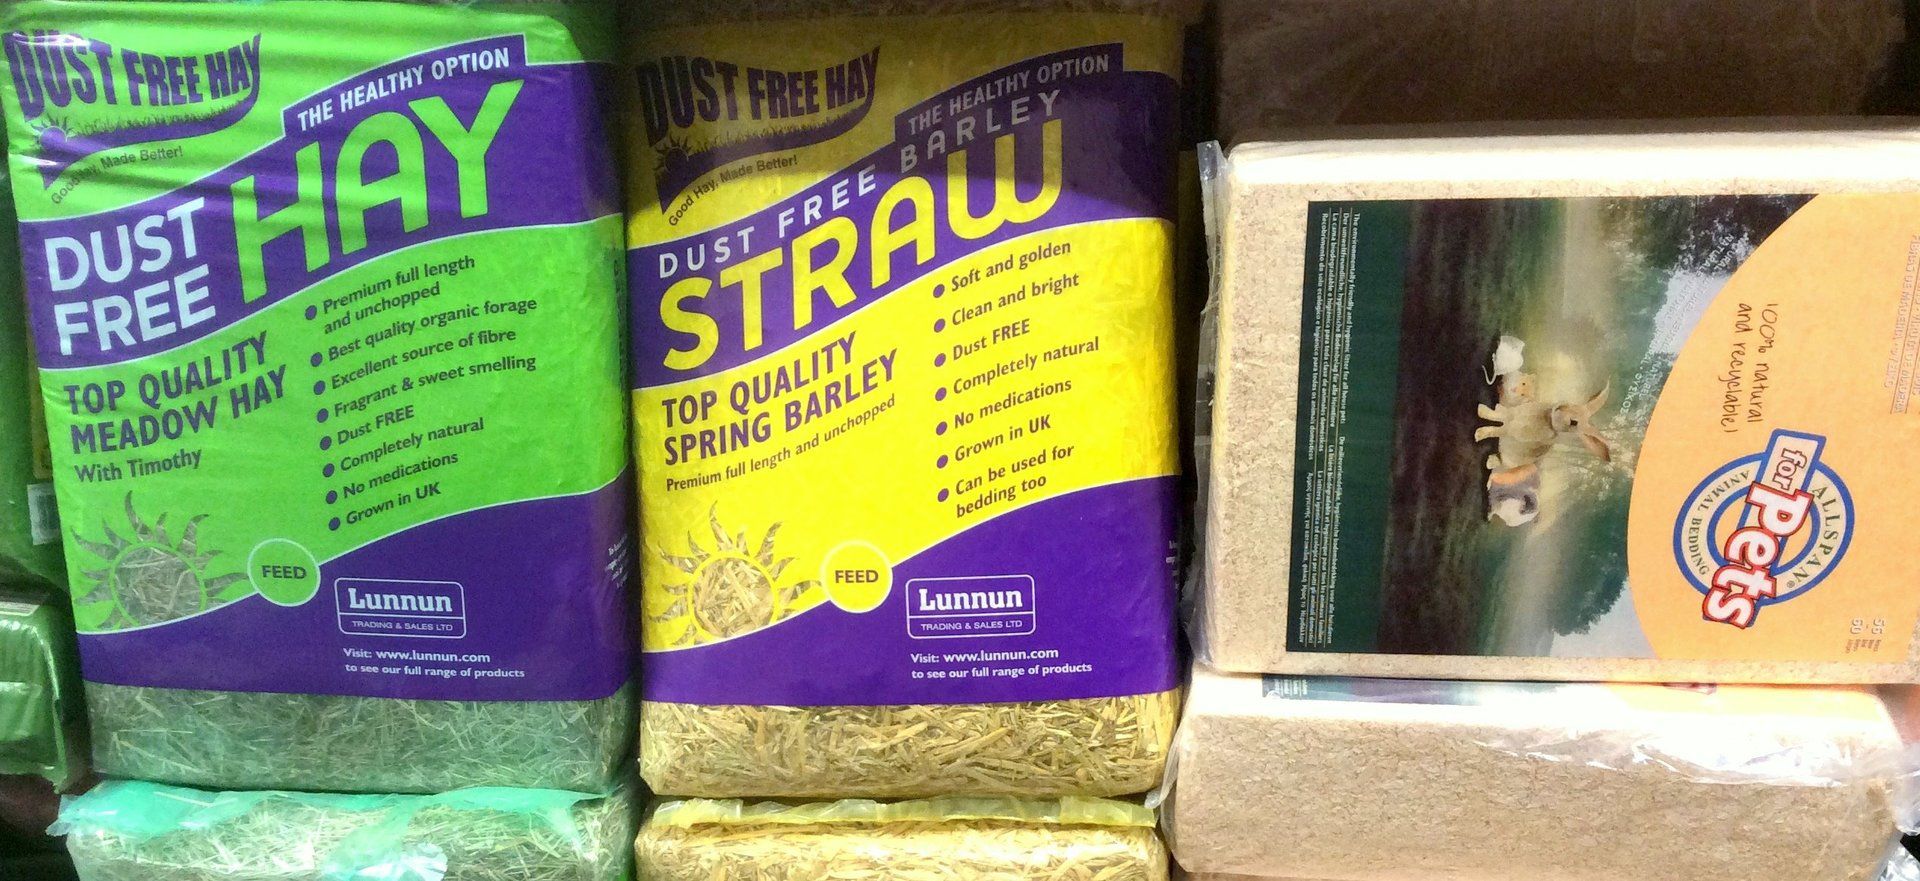 Compact bags of Hay, Straw & Shavings